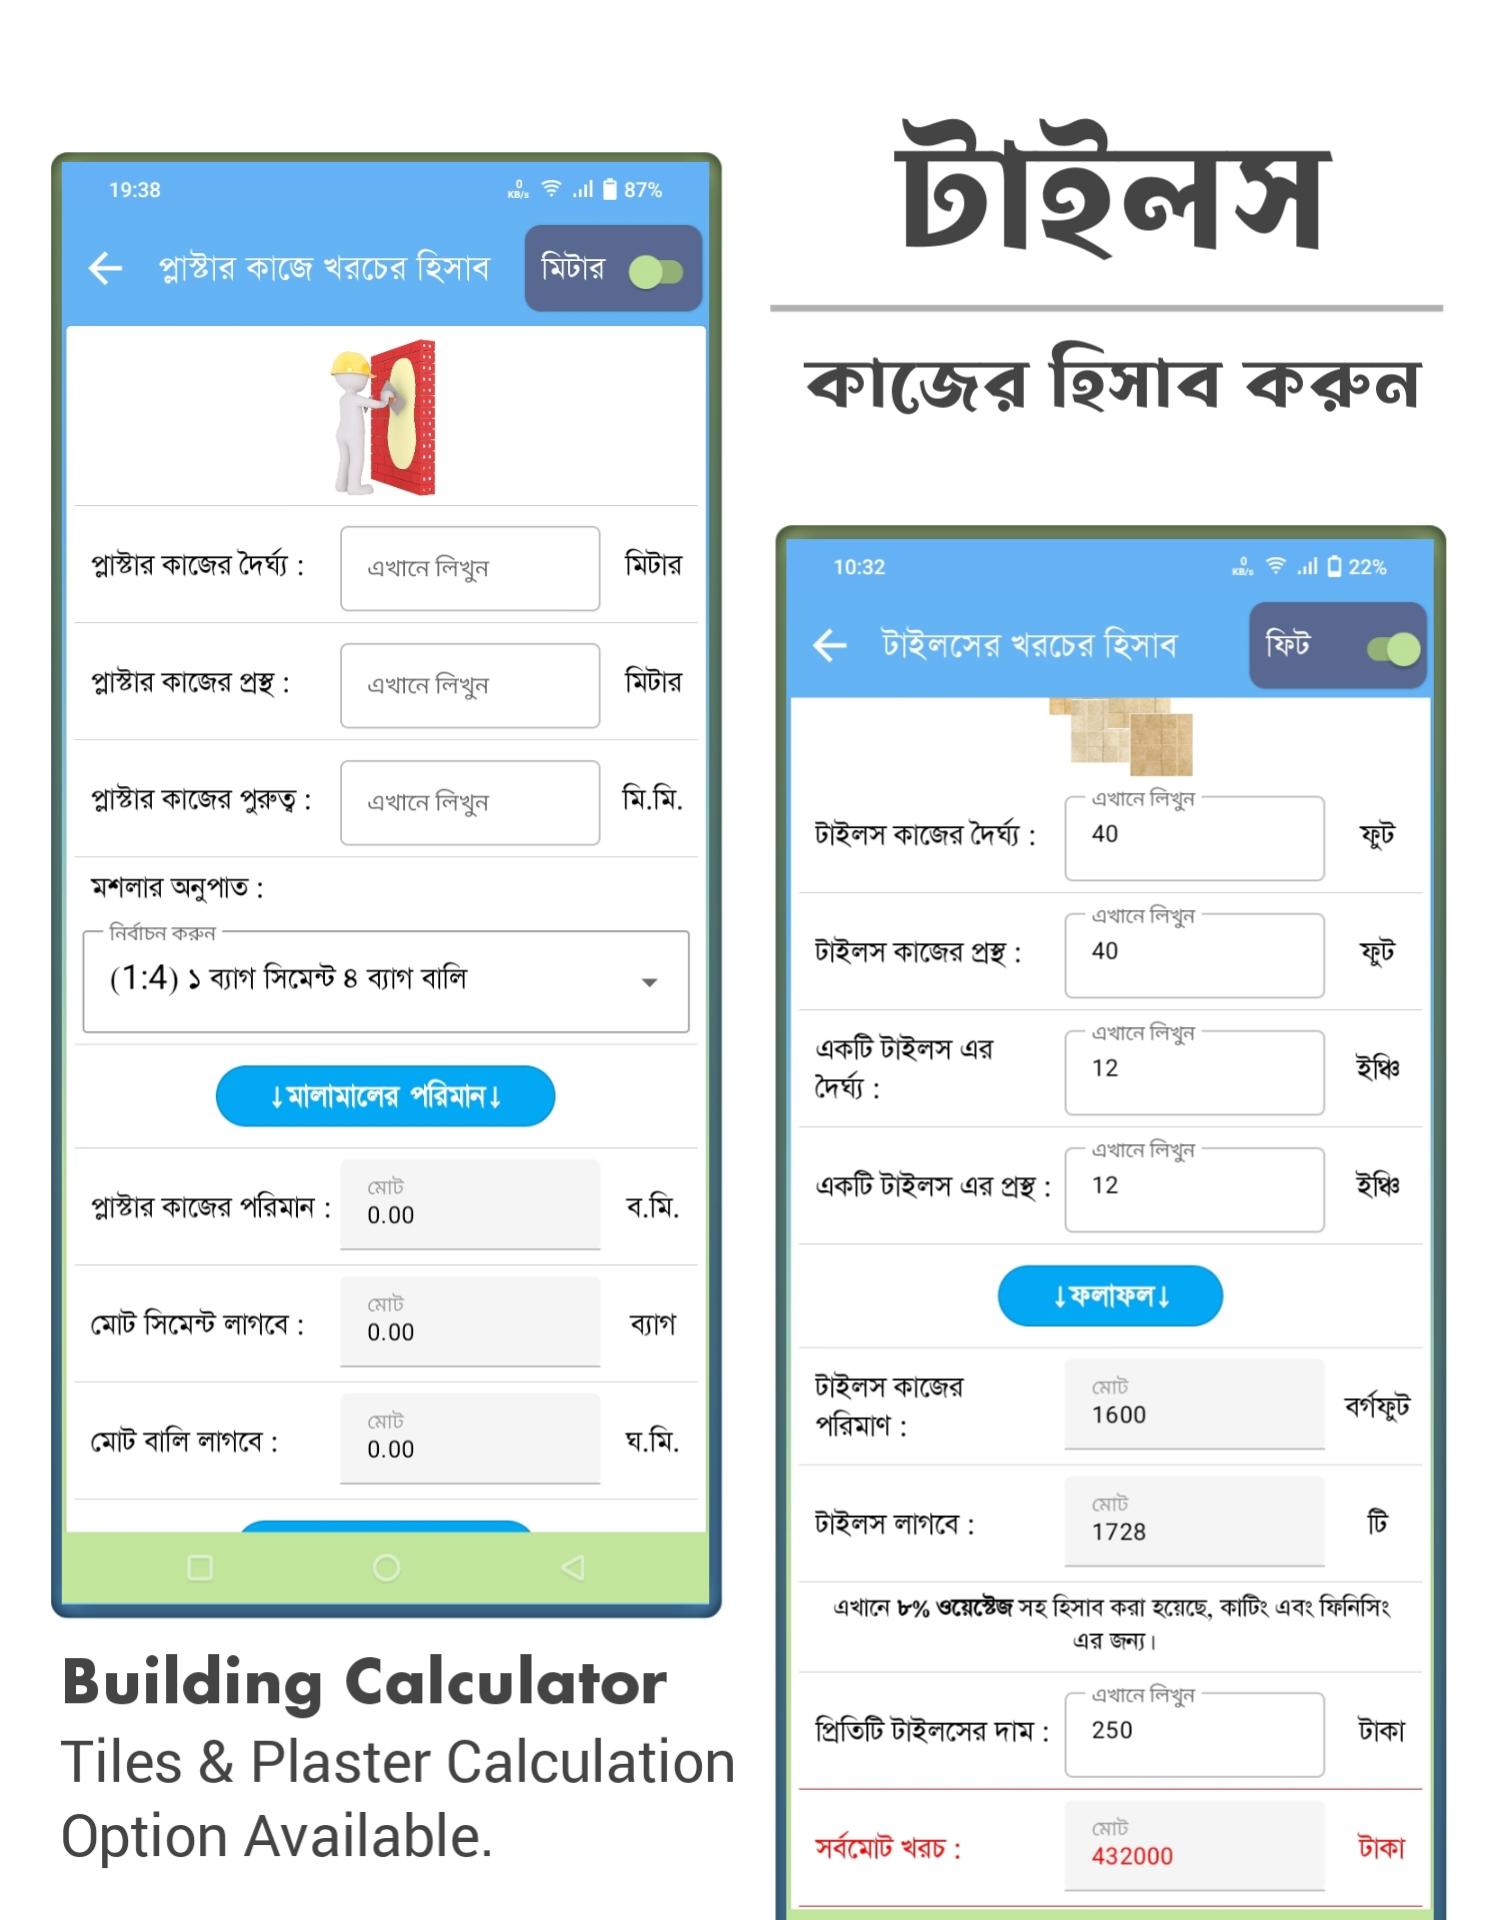 Build calculator. IELTS synonyms. Percentage synonyms IELTS. IELTS Computer delivered. Biletal.